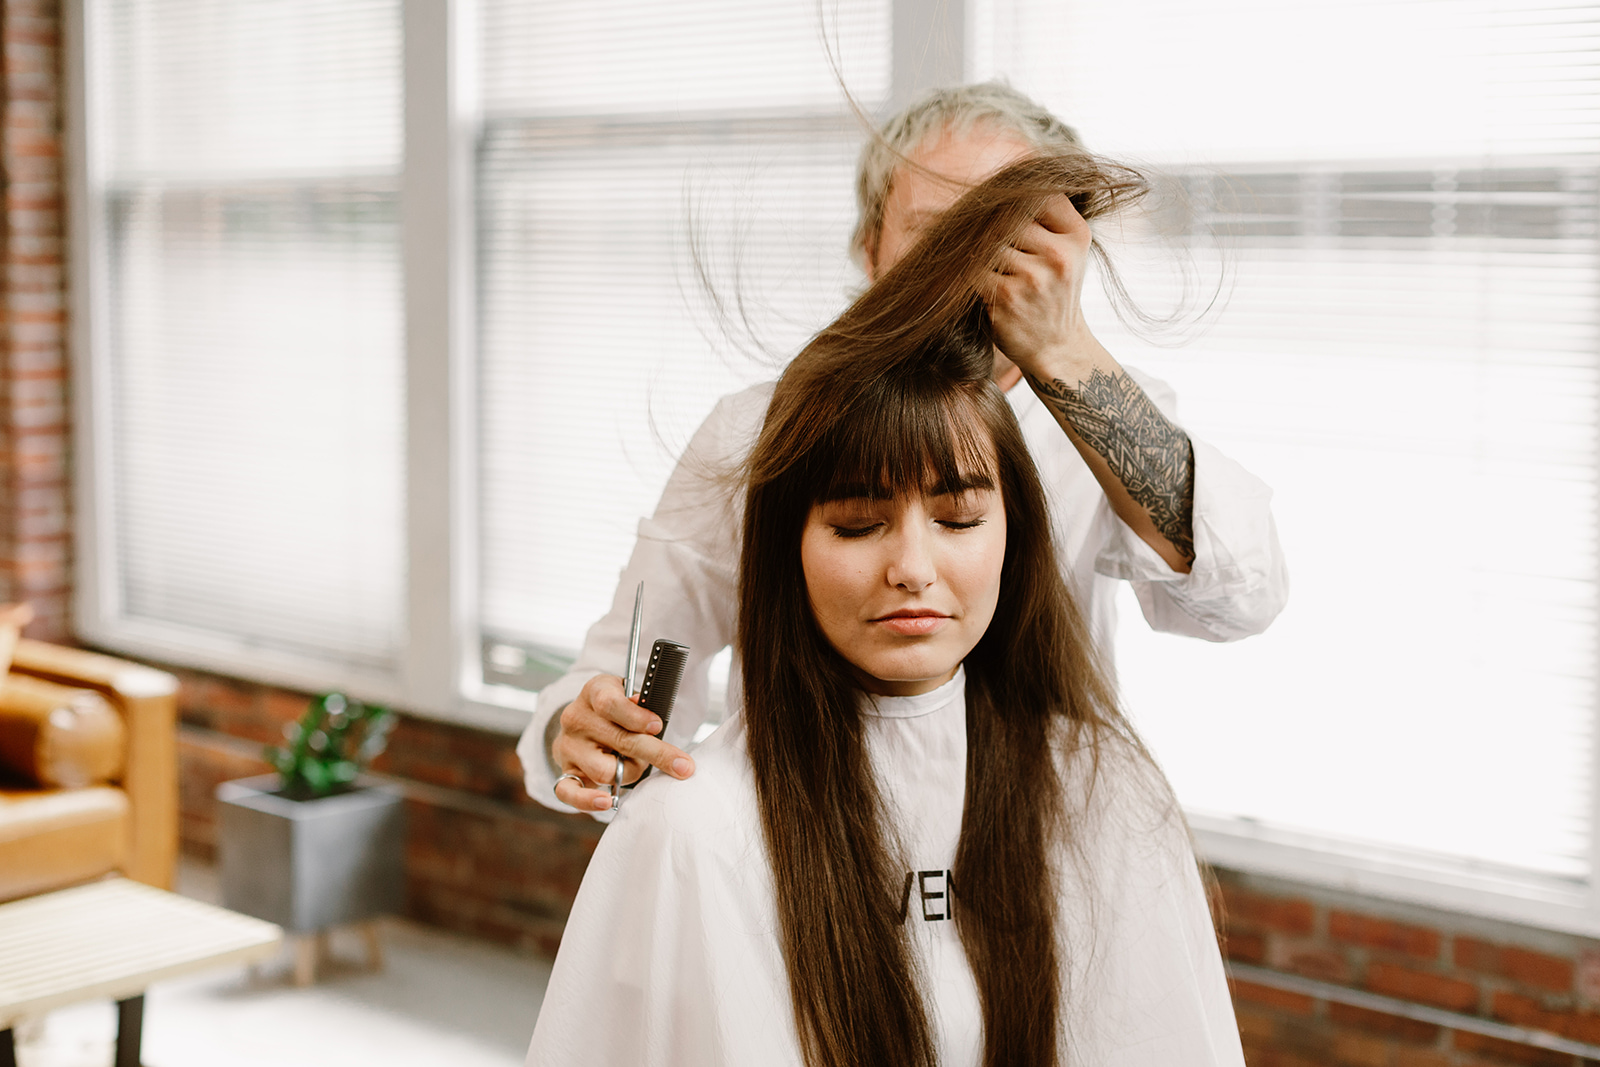 A women in a hair salon decides whether she should get bangs or let her hair grow out.